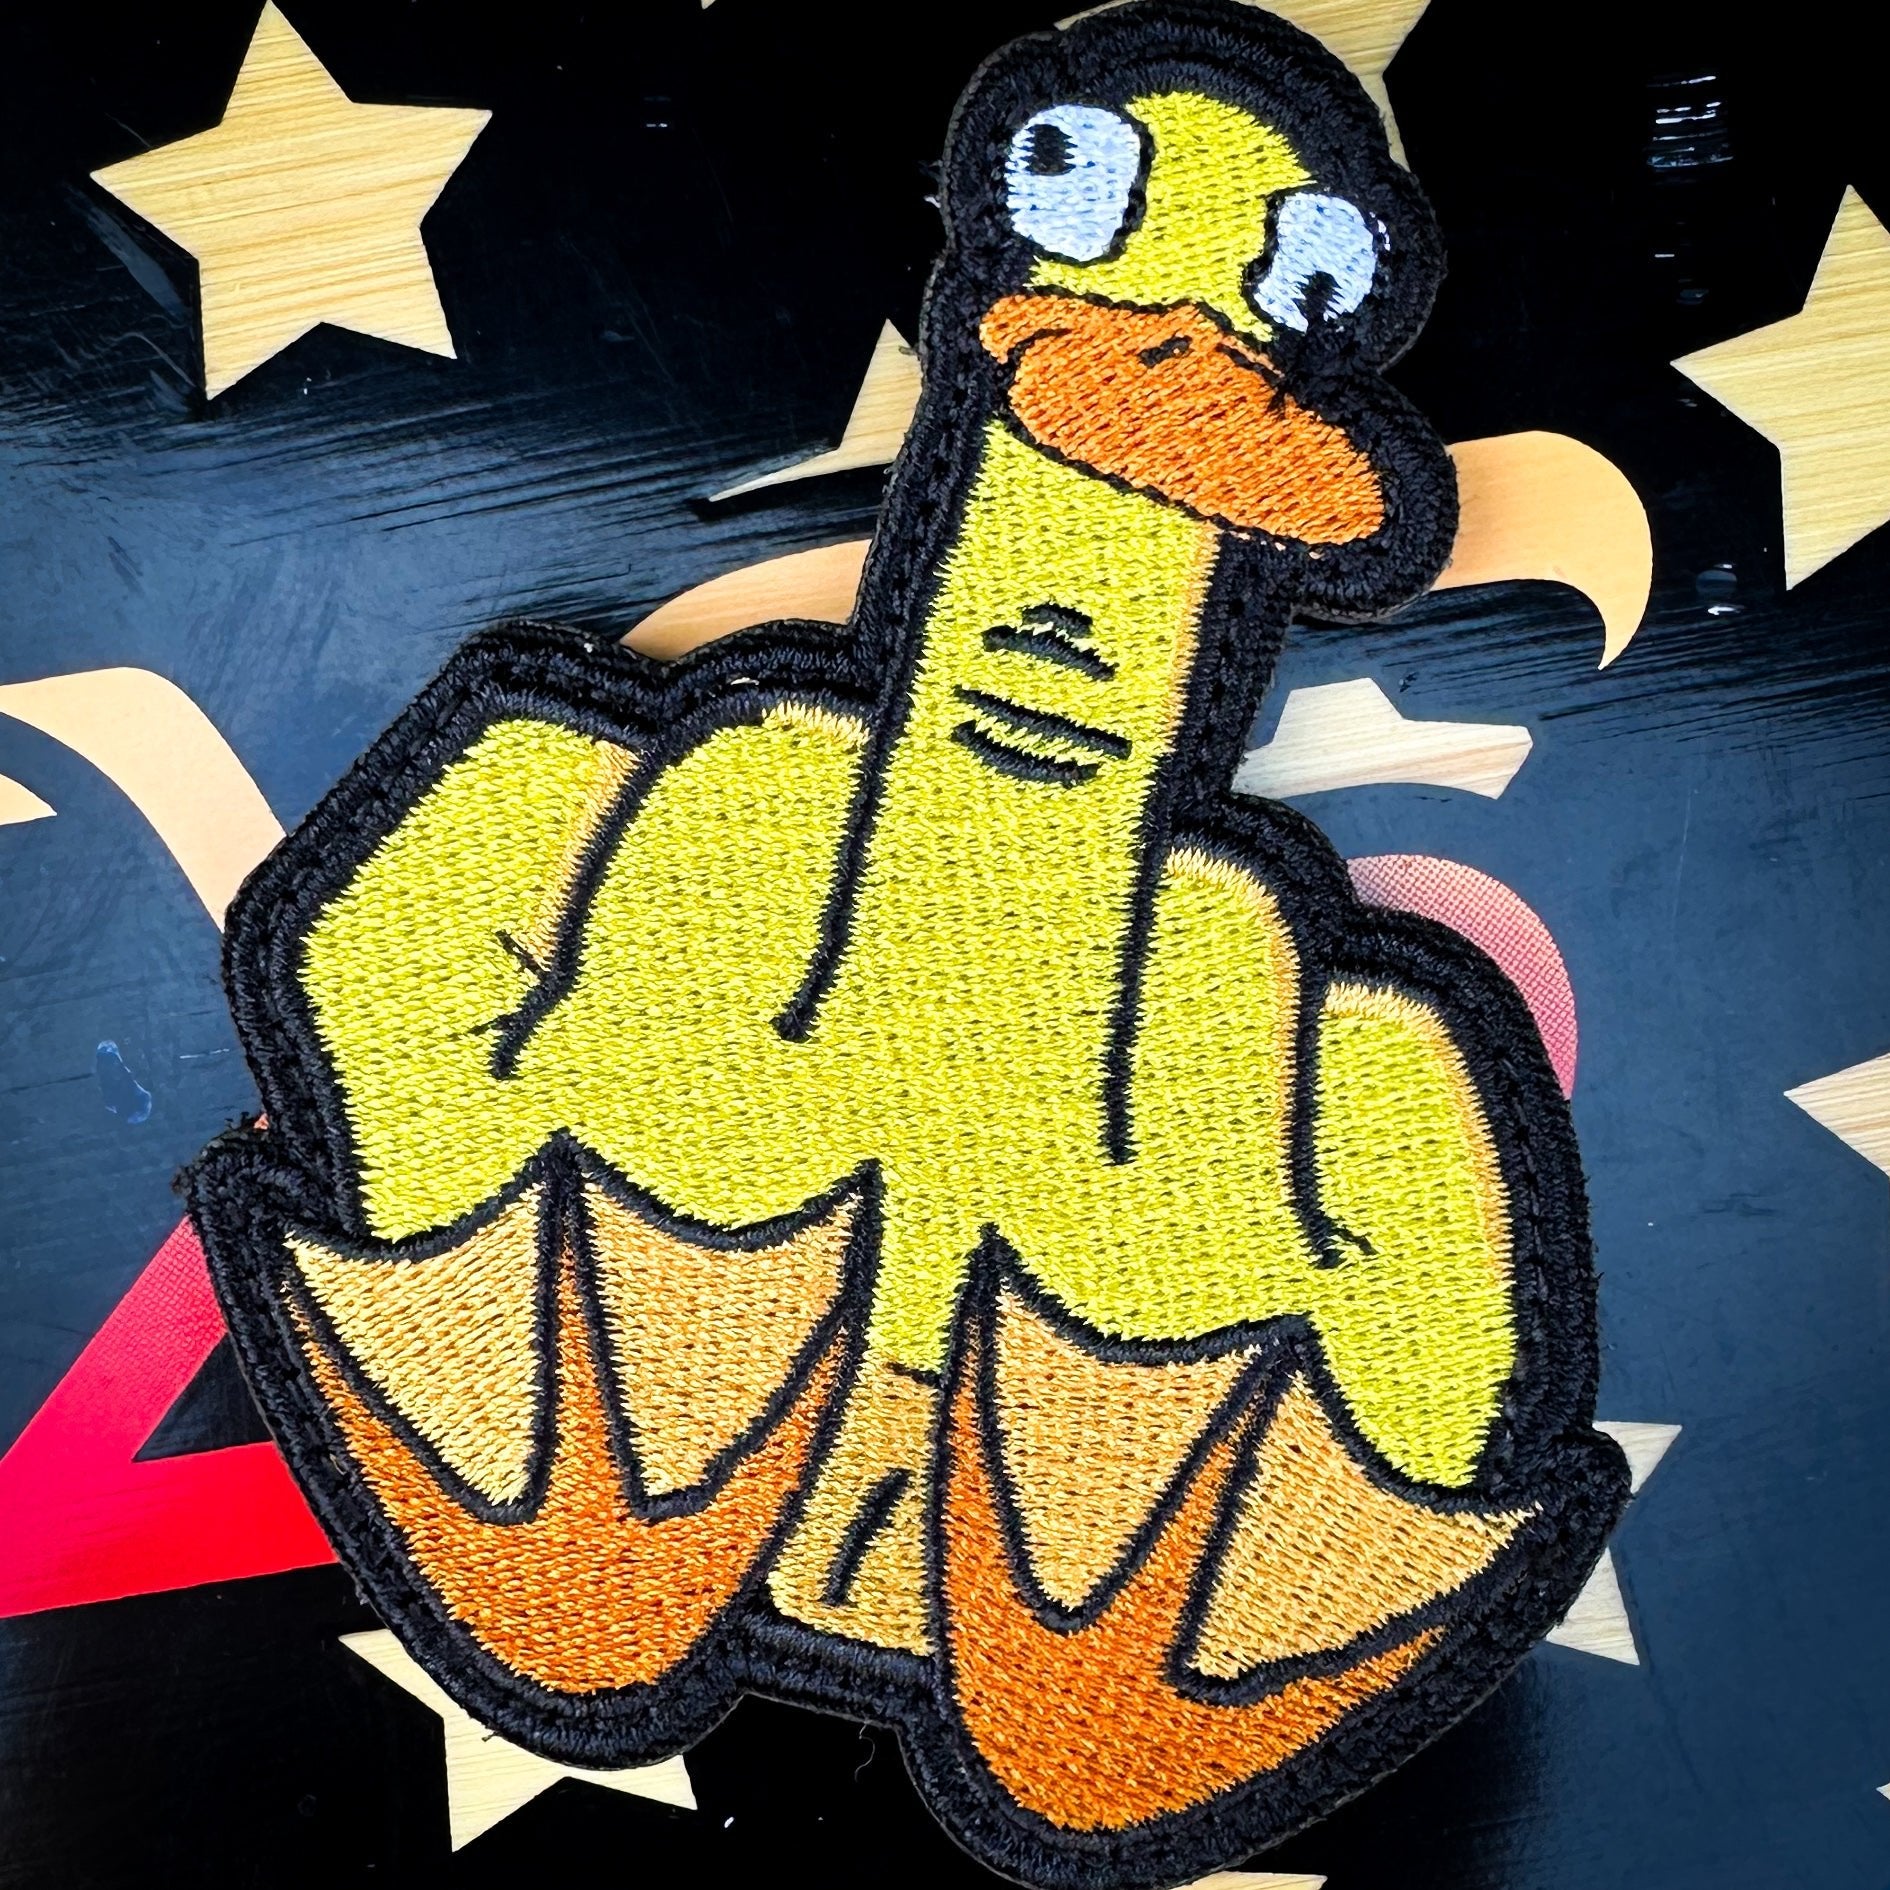 Duck You goofy animated middle finger 3.5 inch fully embroidered patch with hook backing